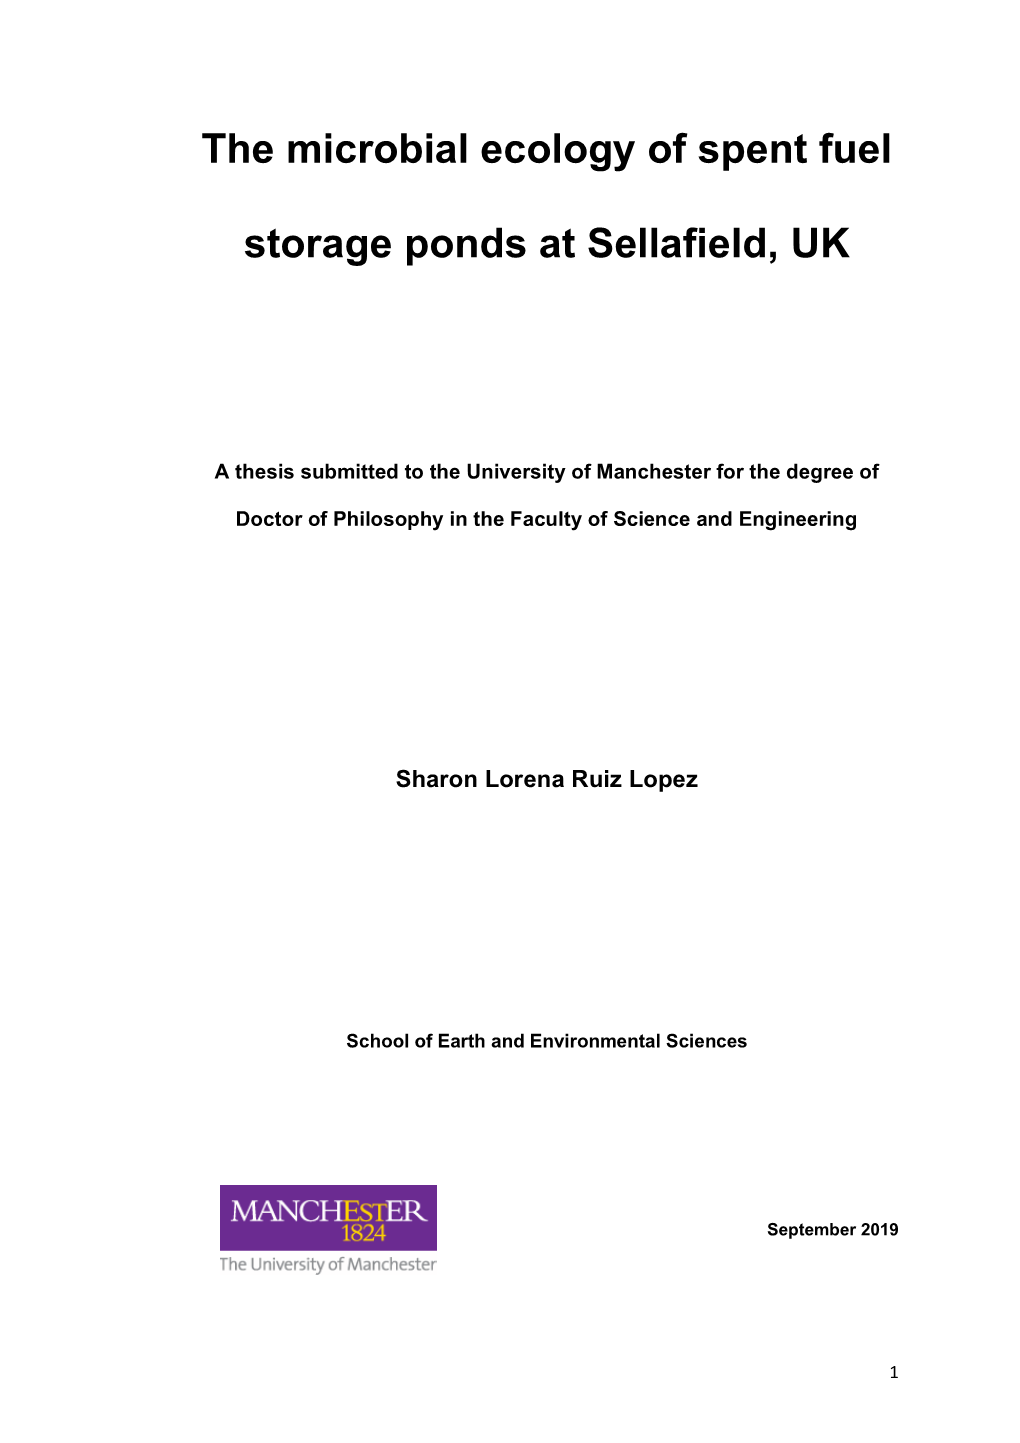 The Microbial Ecology of Spent Fuel Storage Ponds at Sellafield, UK